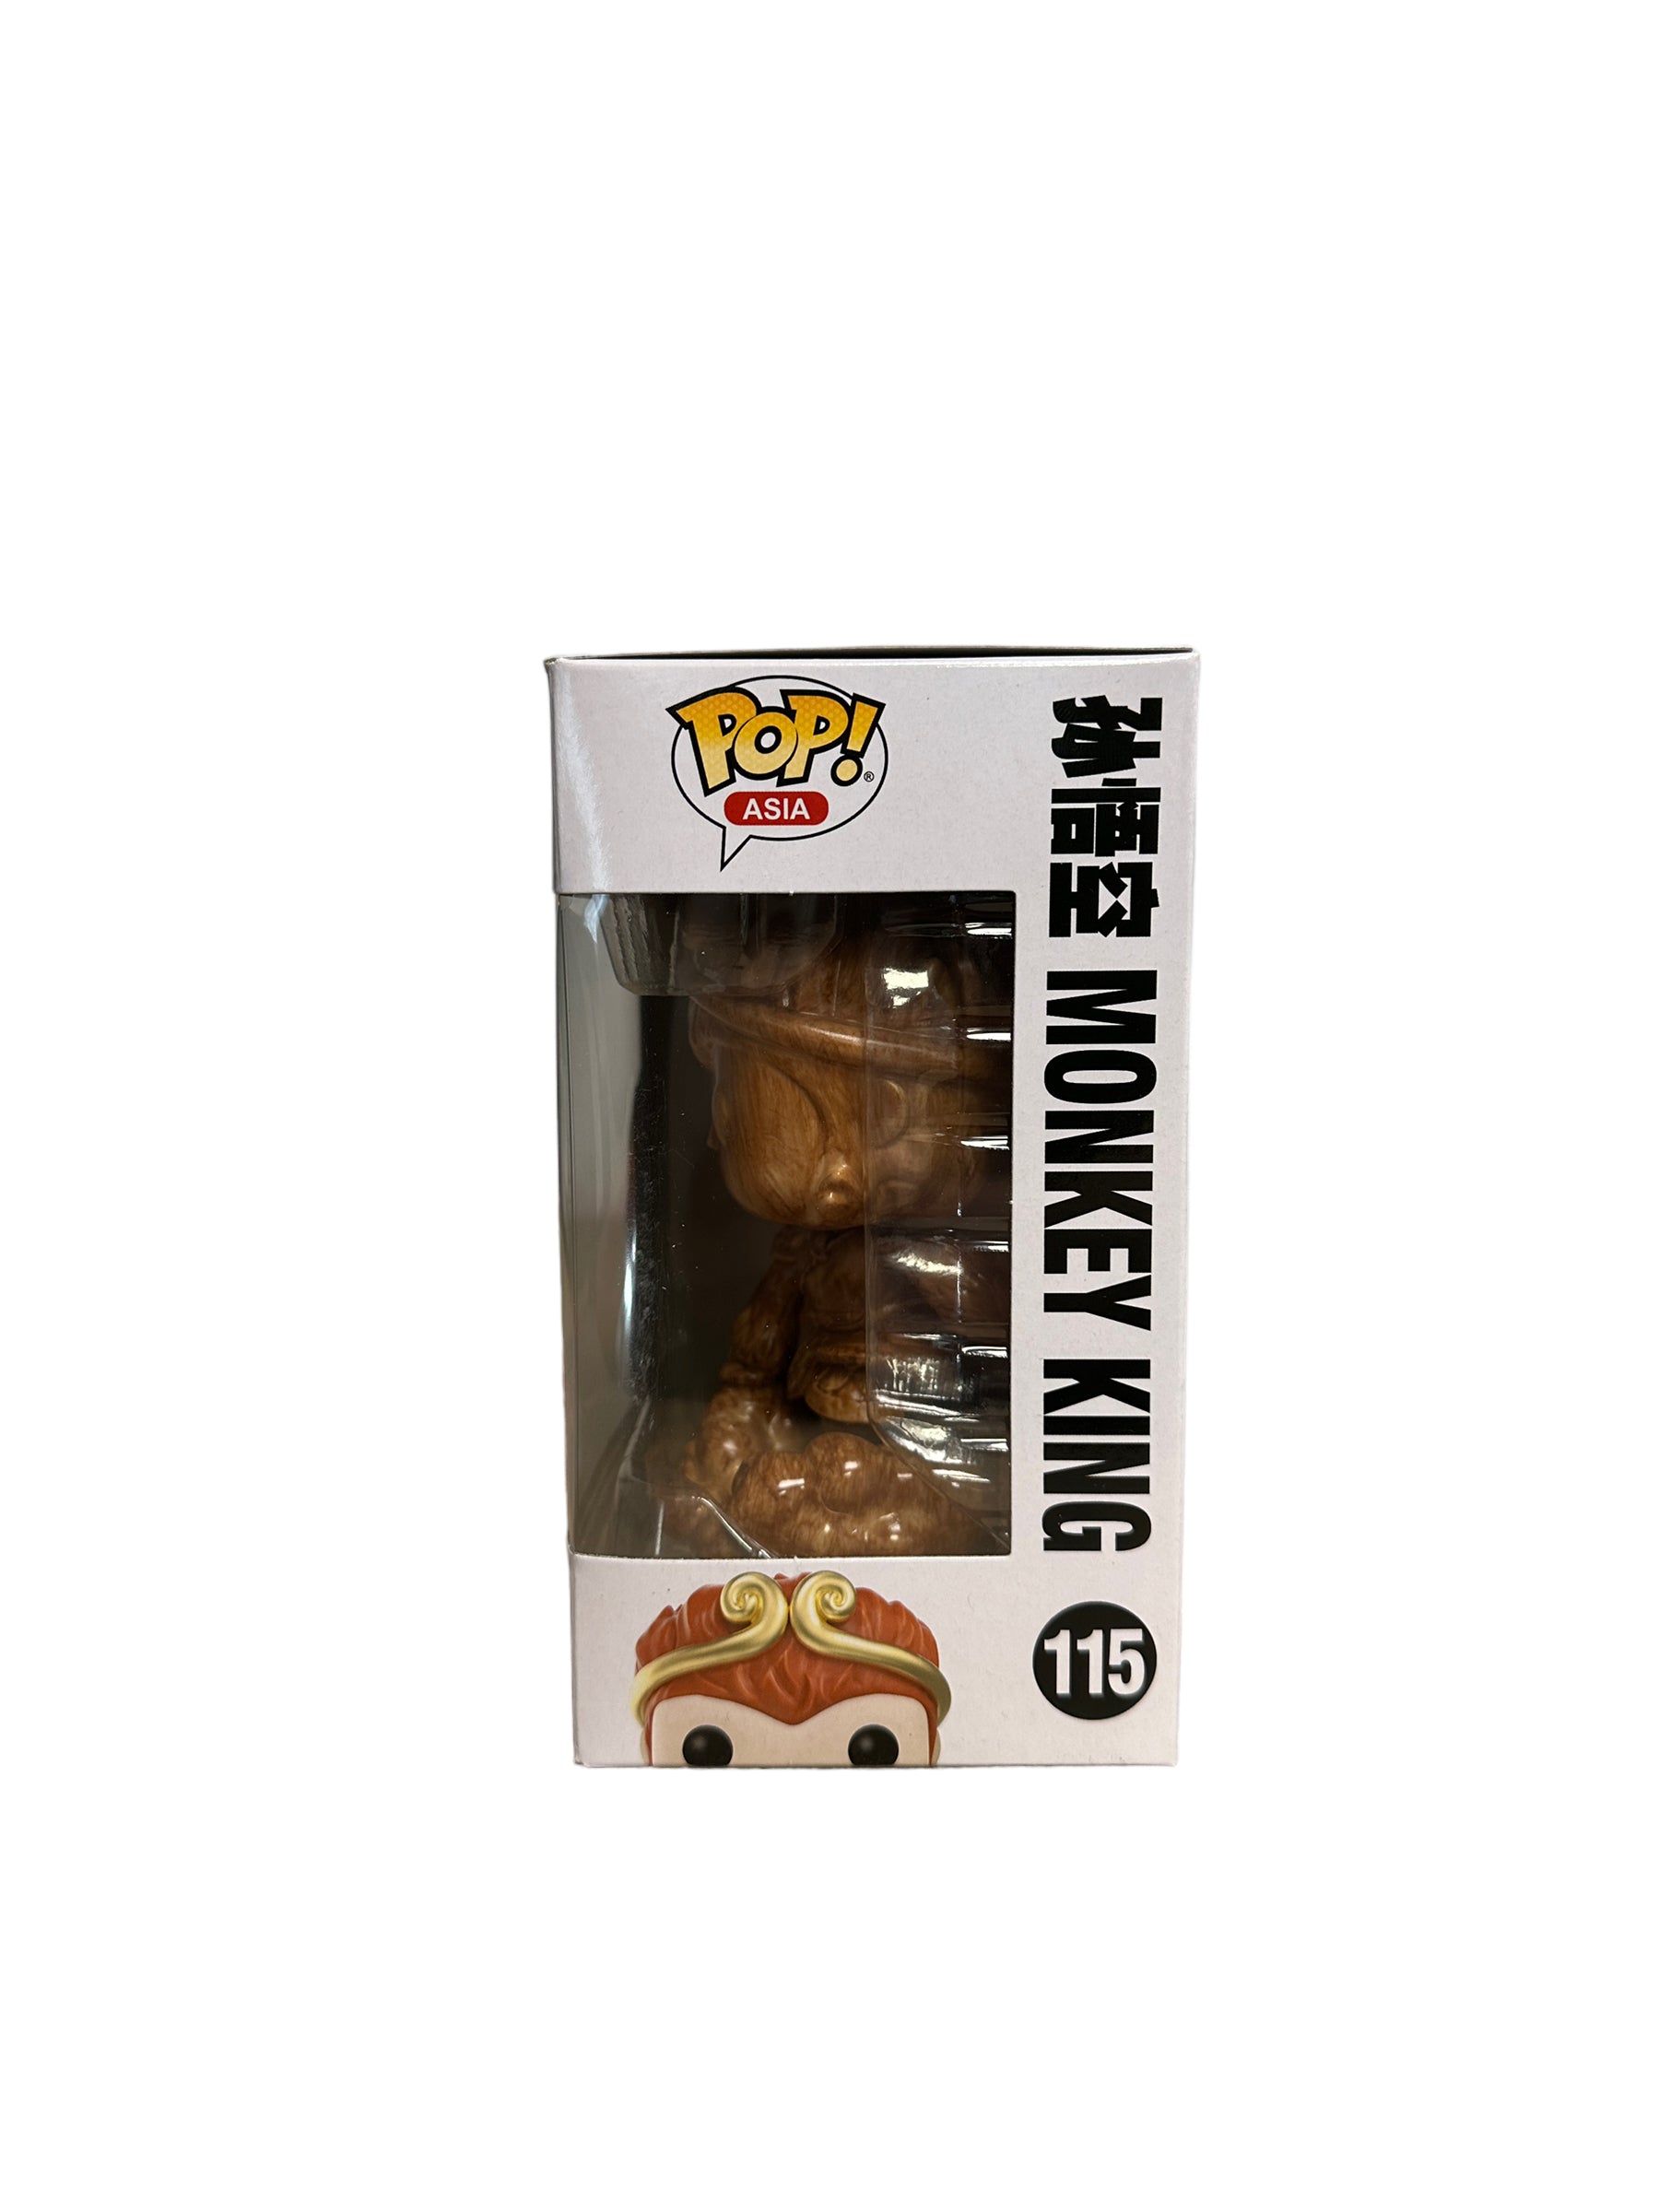 Monkey King (Wood) #115 Funko Pop! - Journey to the West - Asia Convention 2021 Exclusive - Condition 9.5/10